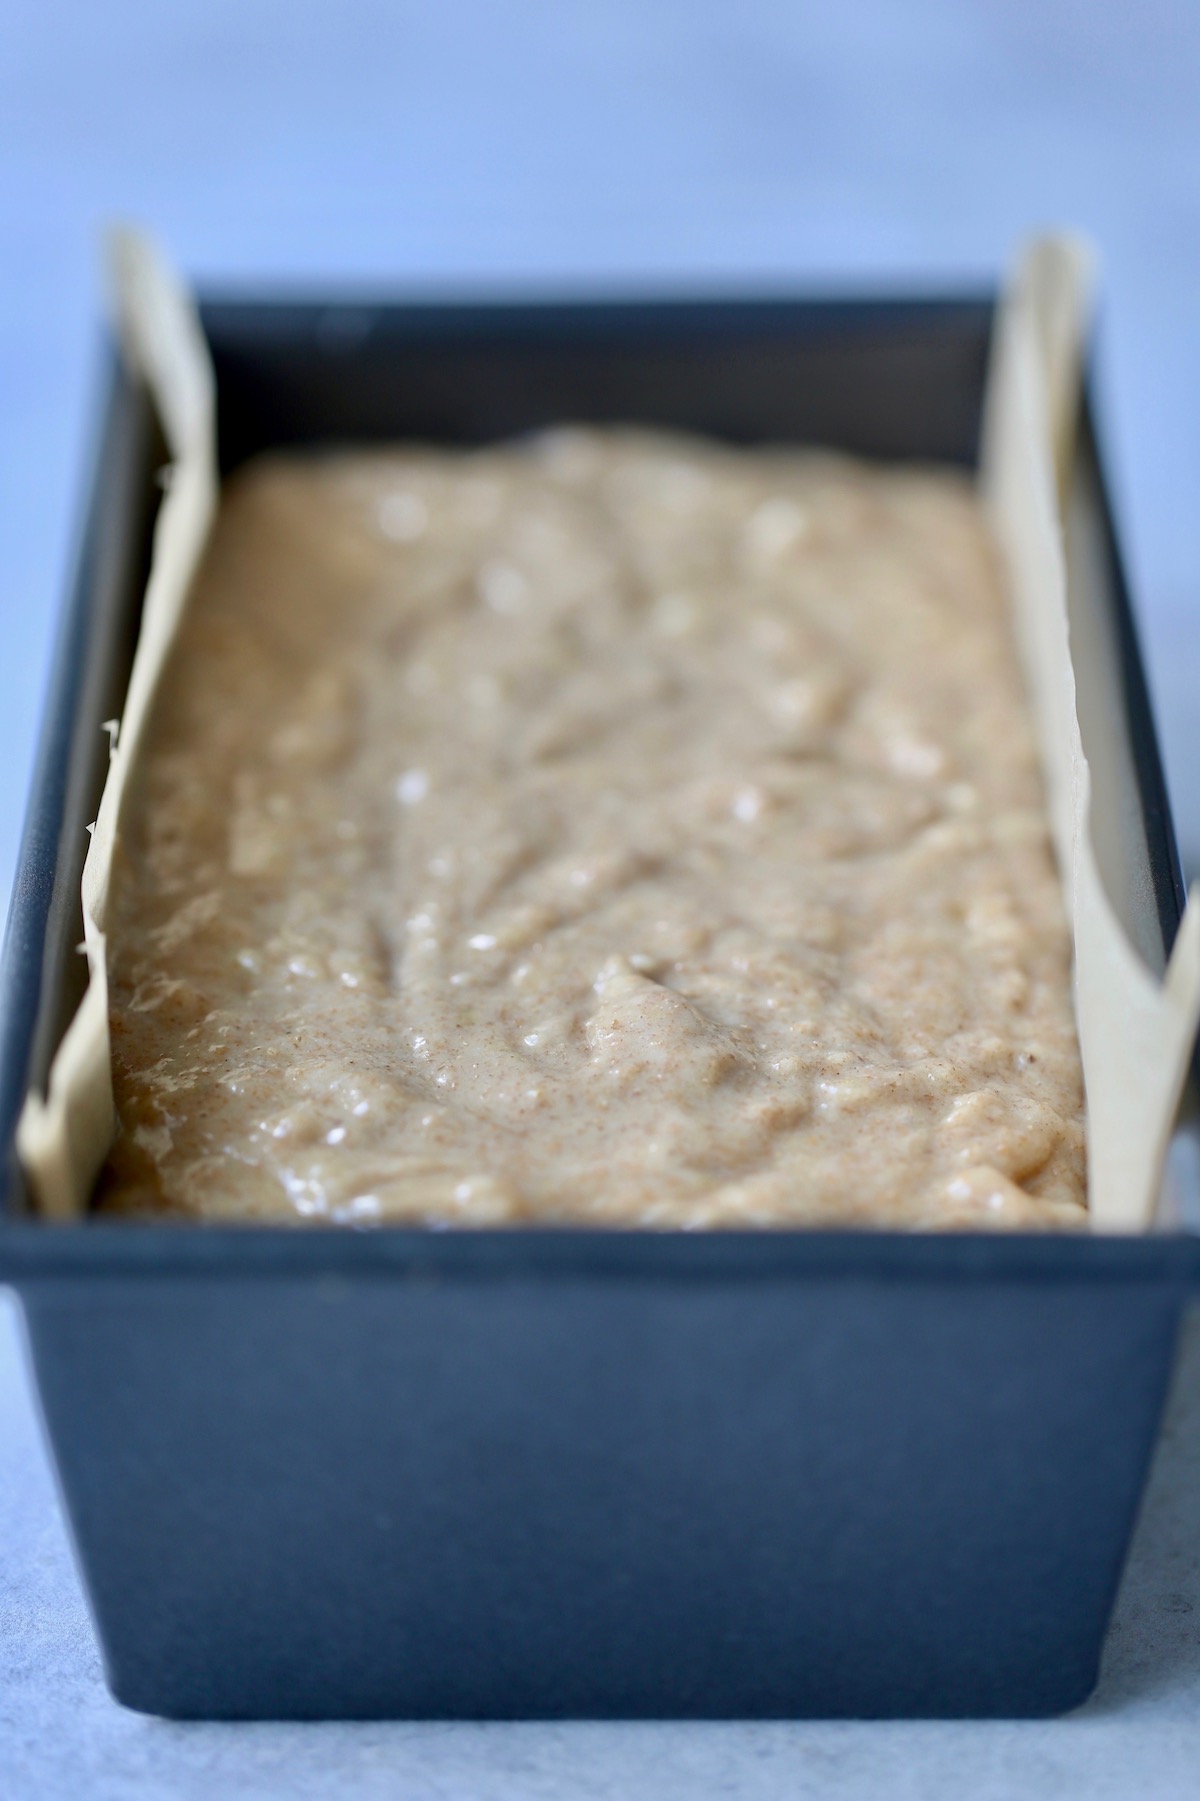 banana bread batter in a loaf pan before baking